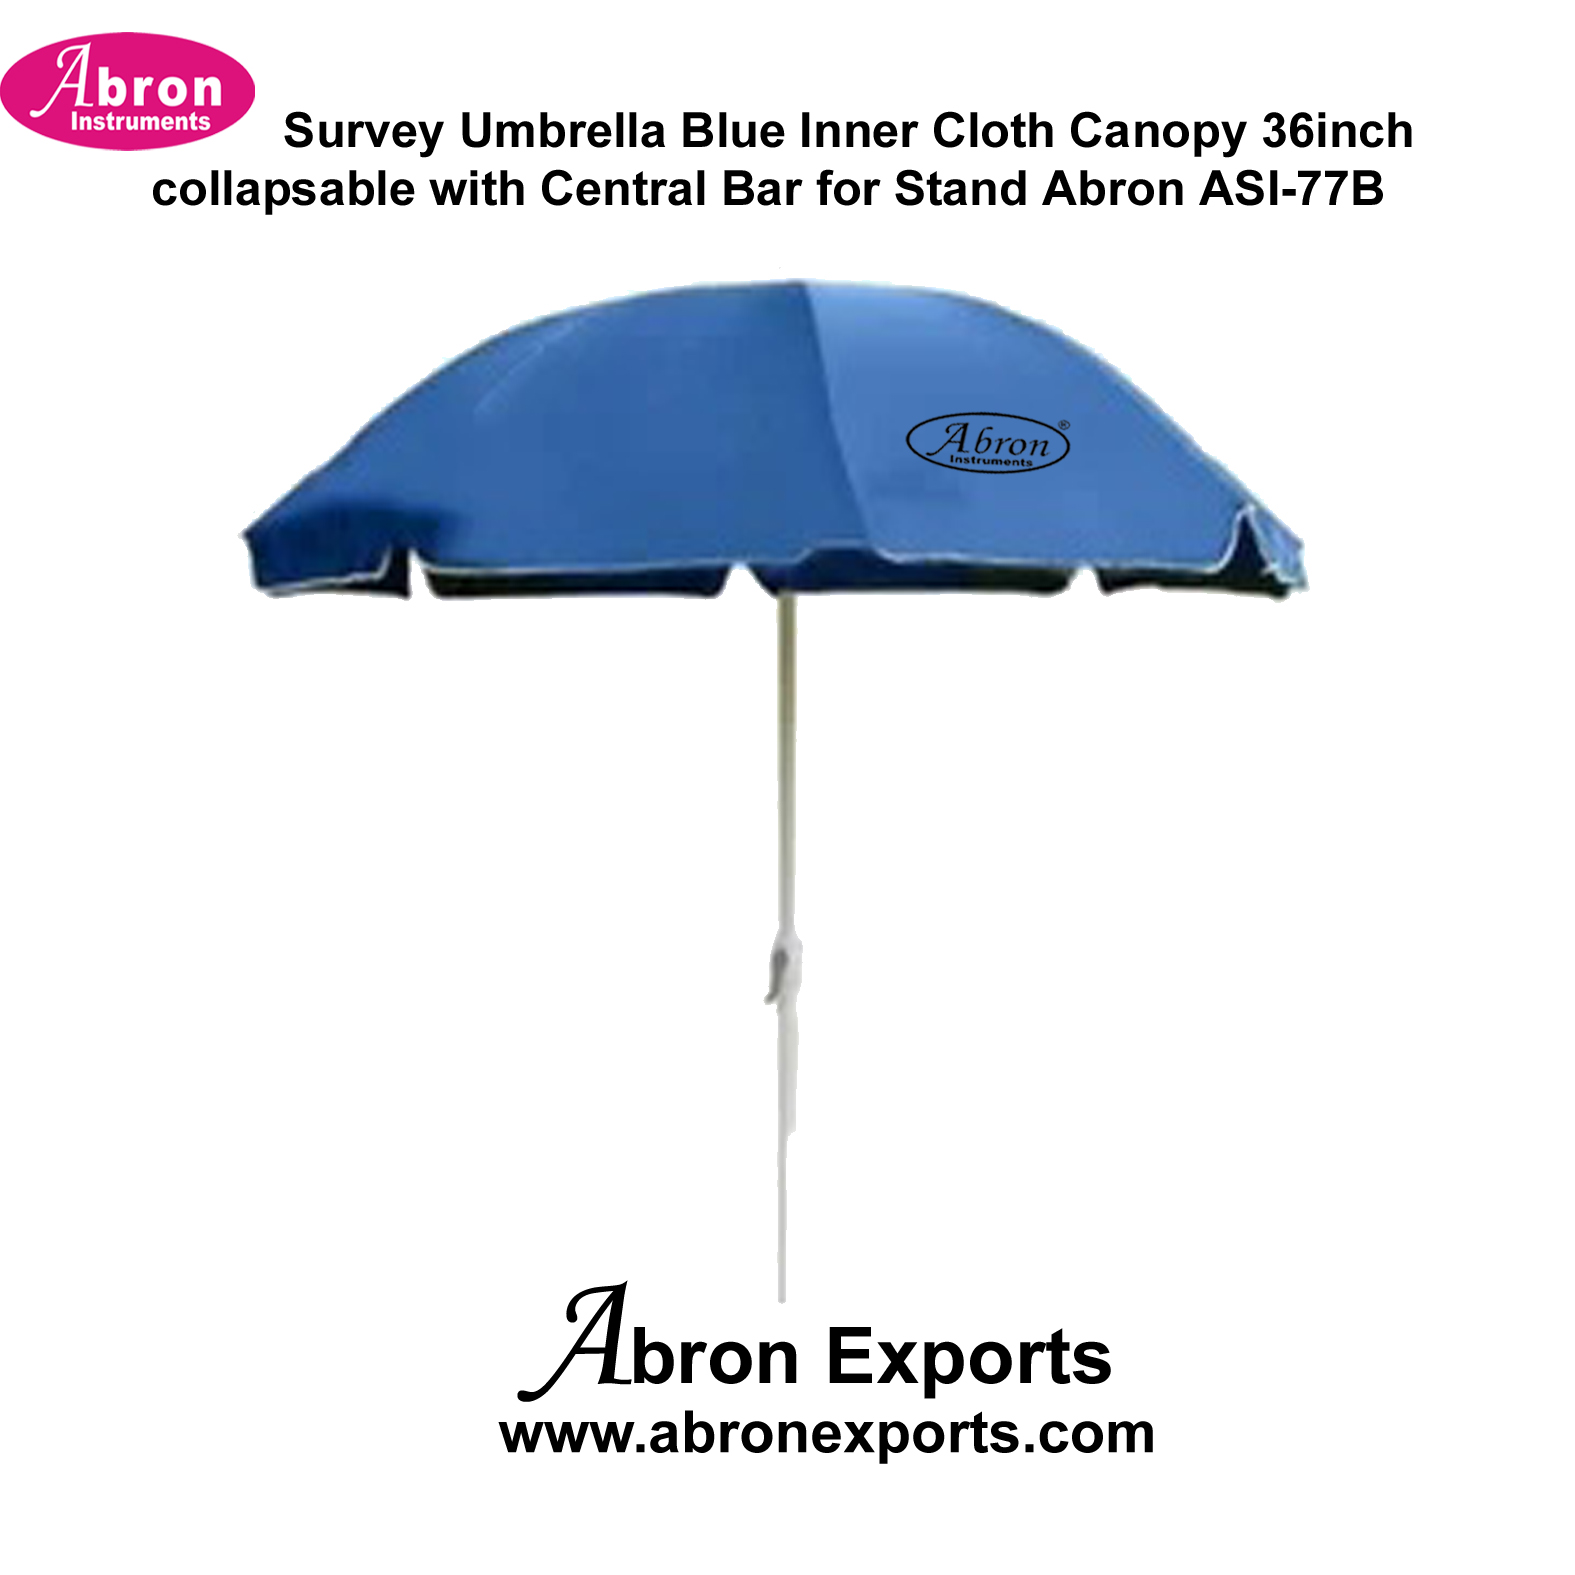 Survey Umbrella Blue Inner Cloth Canopy 36 inch Collapsable With Central Bar For Stand Abron ASI-77B 